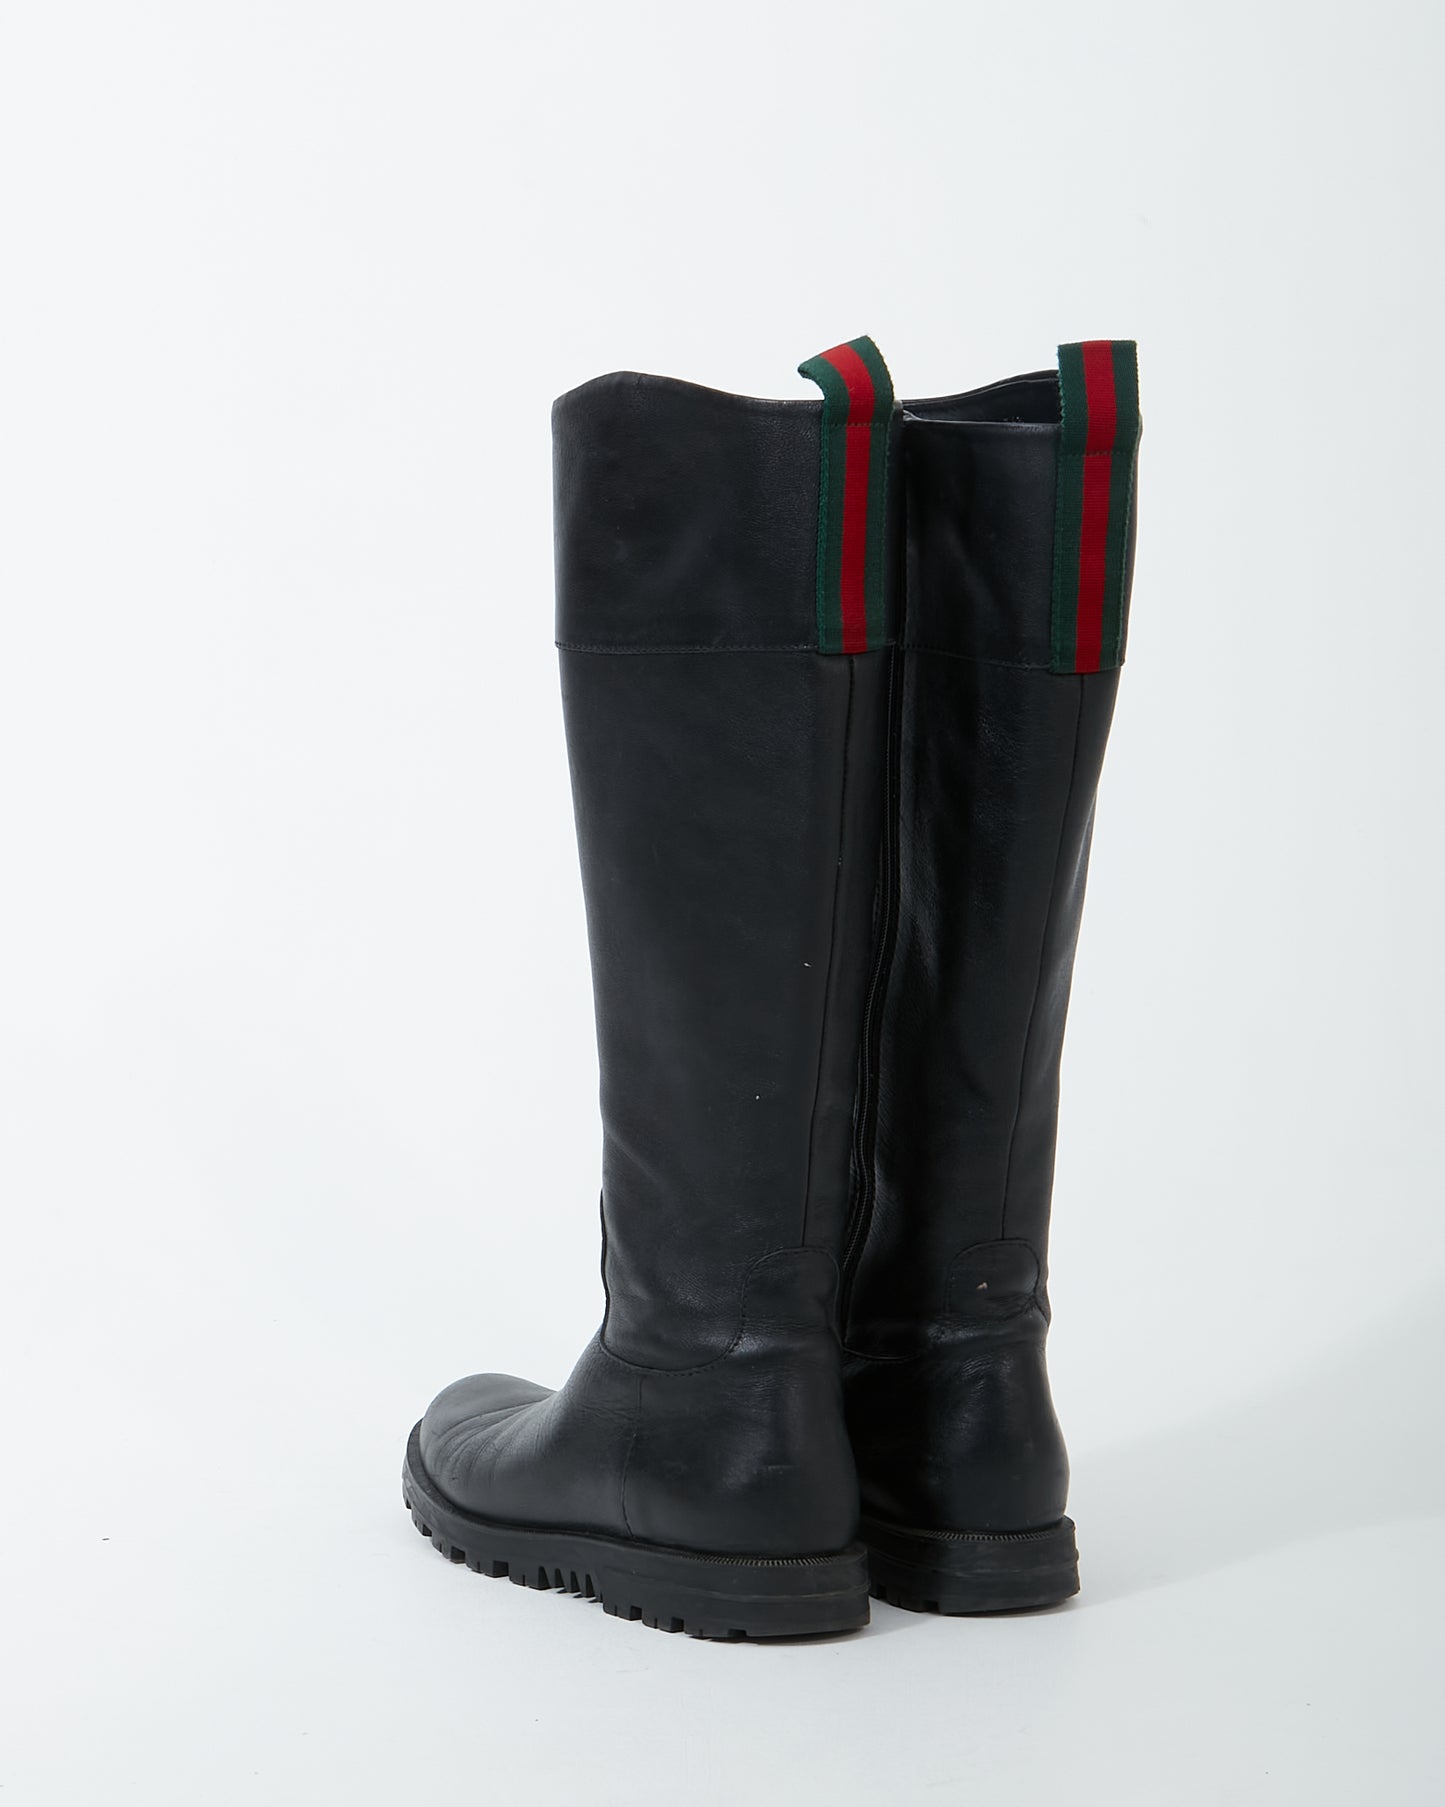 Gucci Black Leather Riding Boots - 36.5